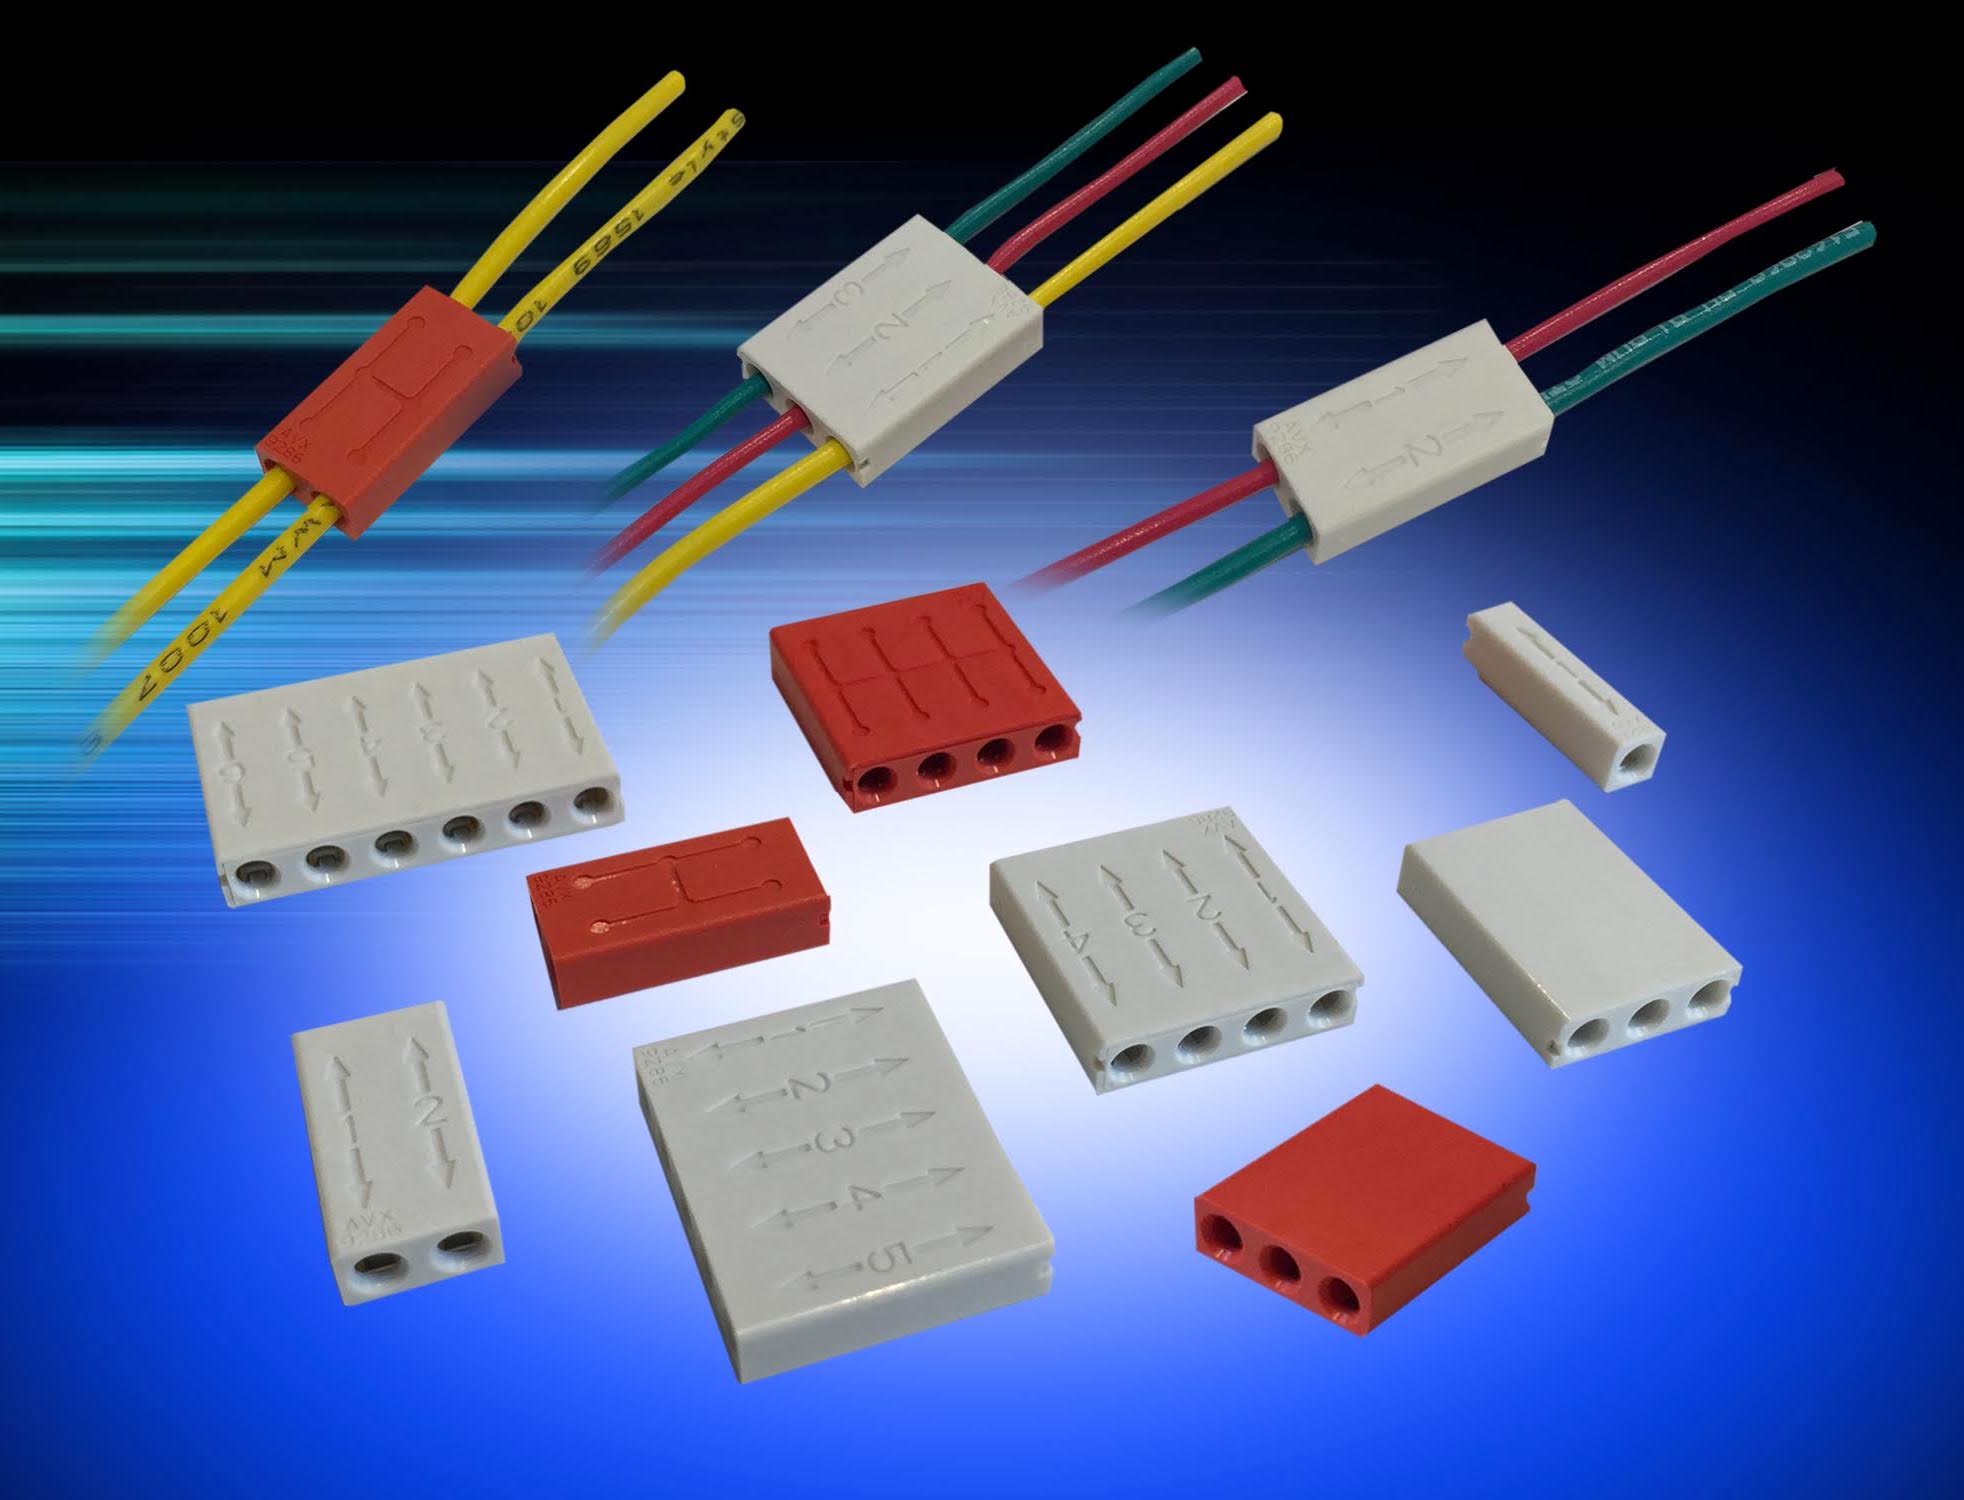 AVX Corporation ’s 9286-200 Series wire-to-wire connectors